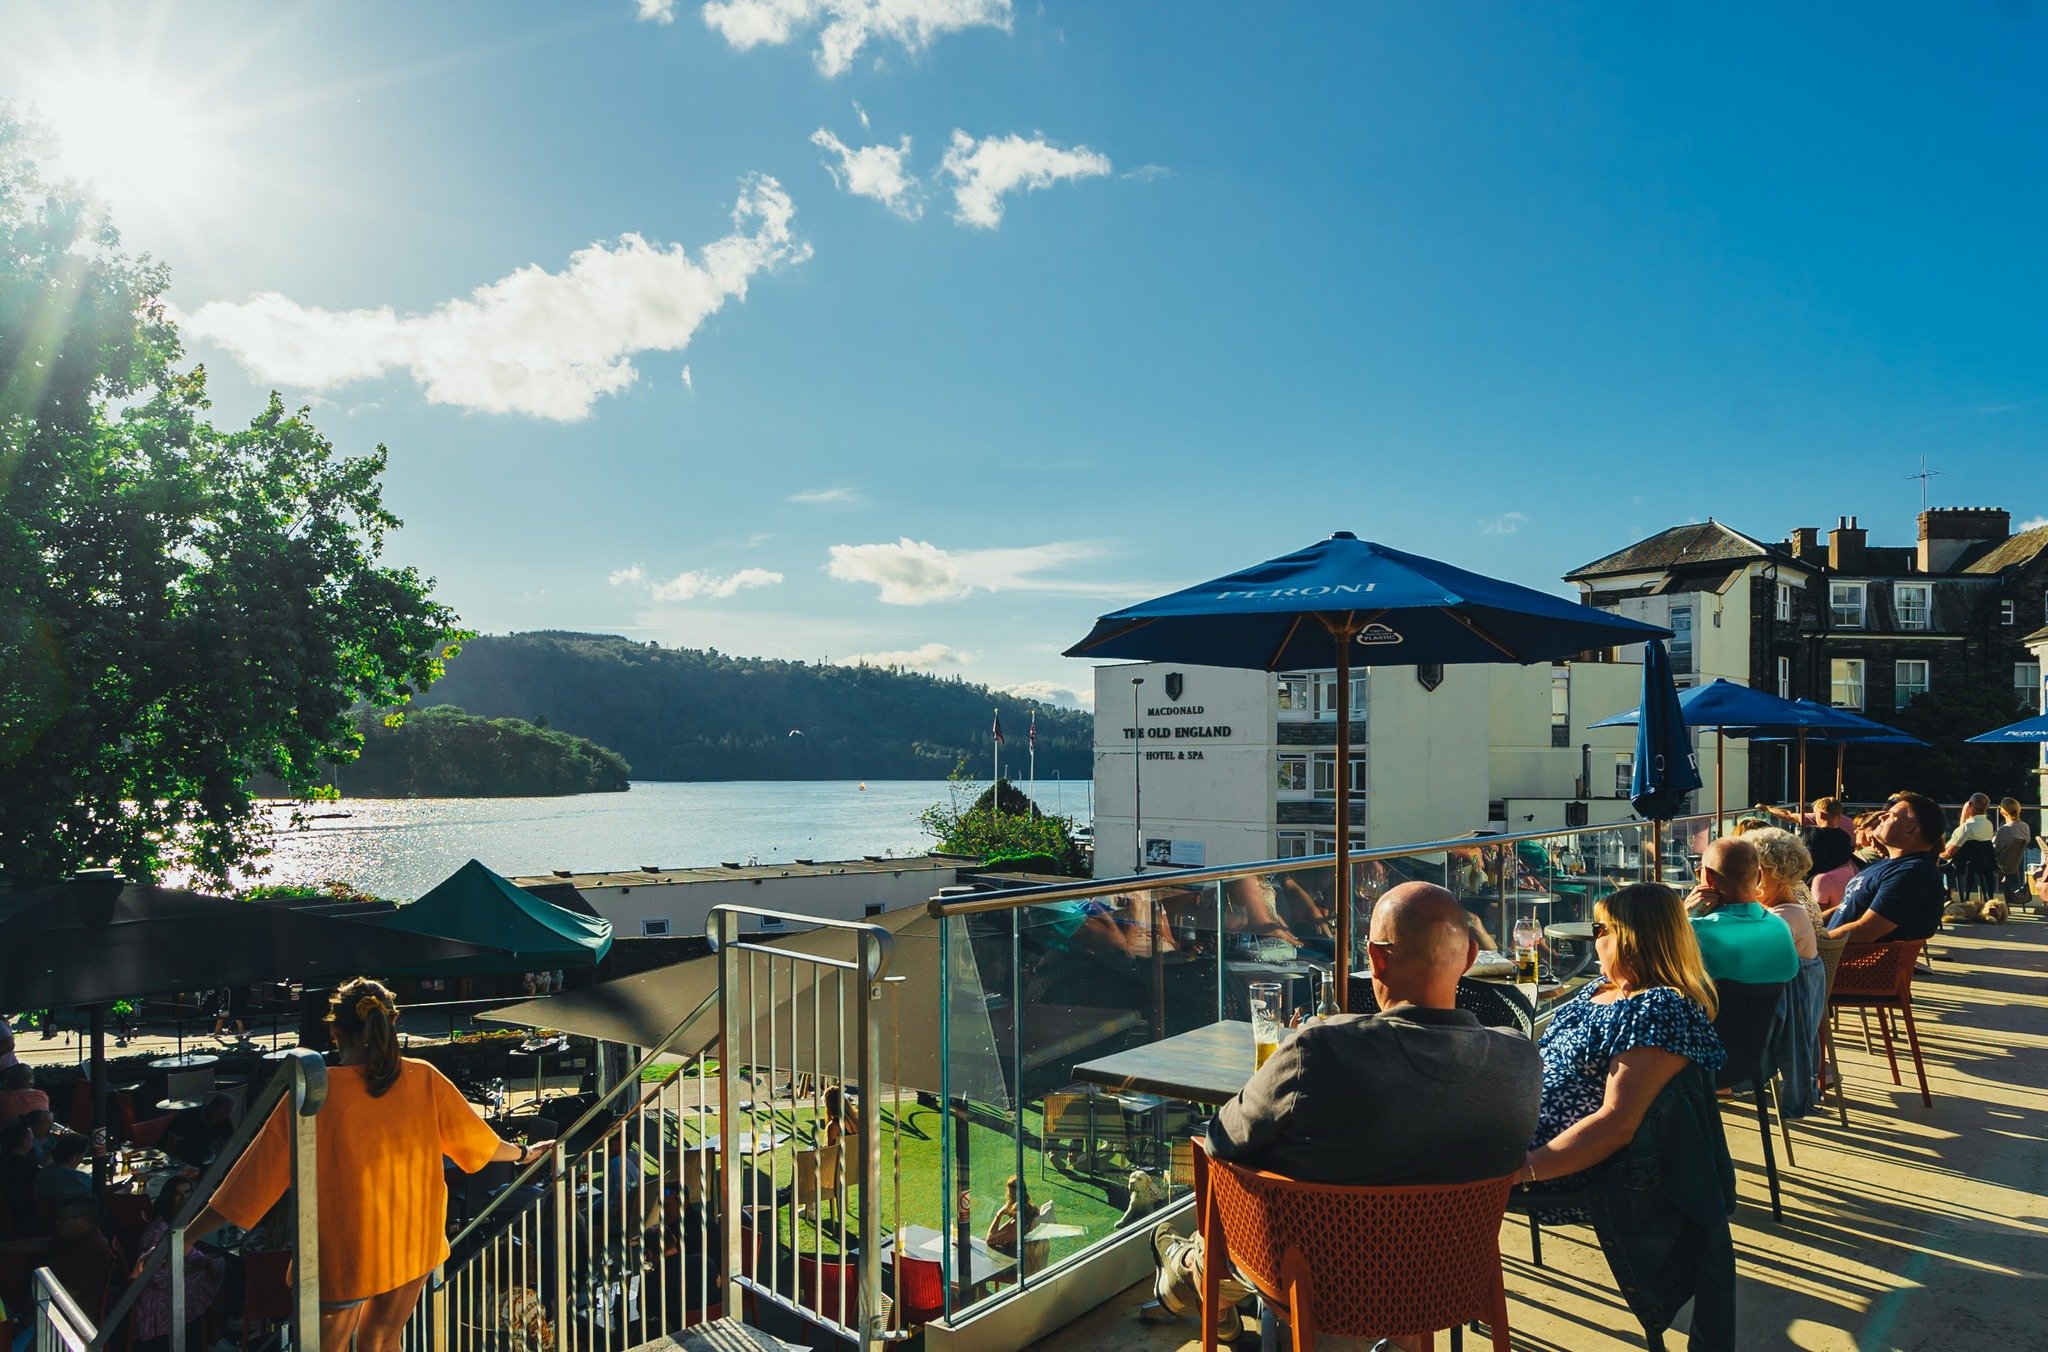 🎉✨ Looking for the perfect venue for your next event? 🌟 Look no further than Lake View Garden Bar! 🍻🍽️

Situated right across from the breathtaking Lake Windermere, our venue is housed in a stunning building with a history dating back over 100 ye